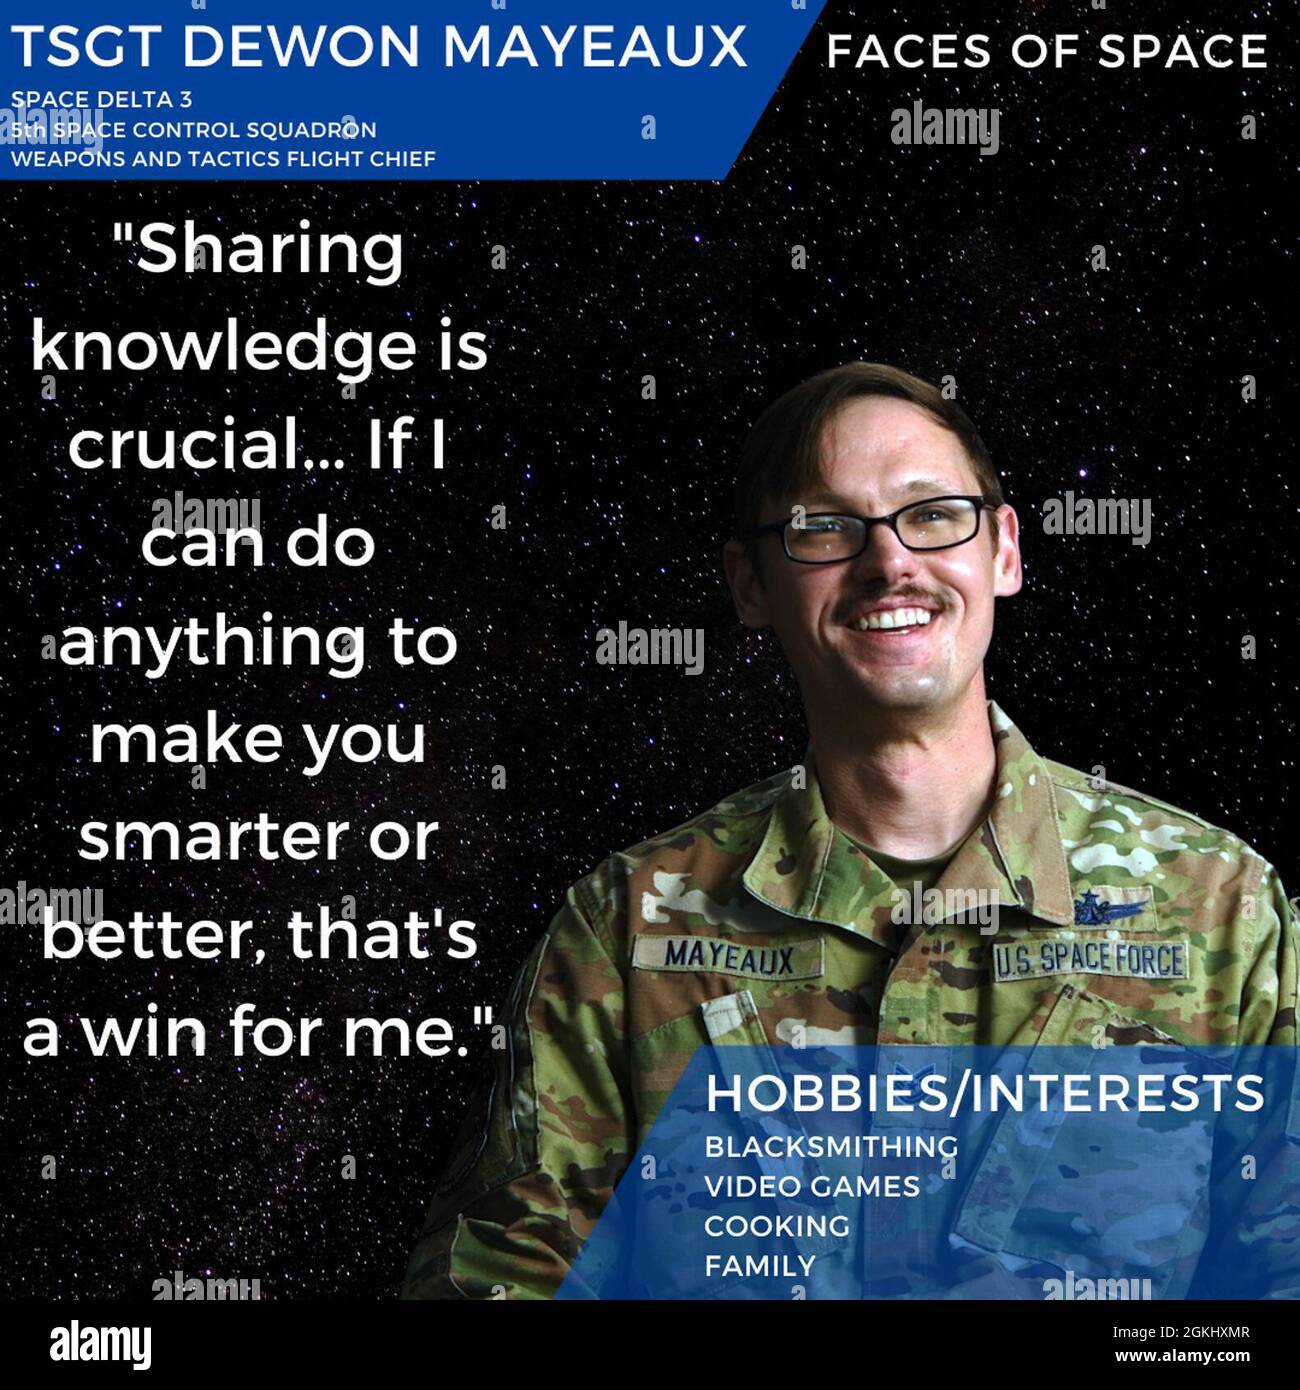 U.S. Space Force Tech. Sgt. Dewon Mayeaux, Space Delta 2, 5th Space Control Squadron, talks about family, grit, sharing knowledge in small-town Louisiana and how he came out of his introverted shell during his time in the U.S. Air Force and U.S. Space Force at Peterson Air Force Base, Colorado. Mayeaux’s lifelong love of working with his hands and making things has more recently manifested in a home blacksmithing hobby, which has allowed him to make all manner of tools, knives and more. Stock Photo